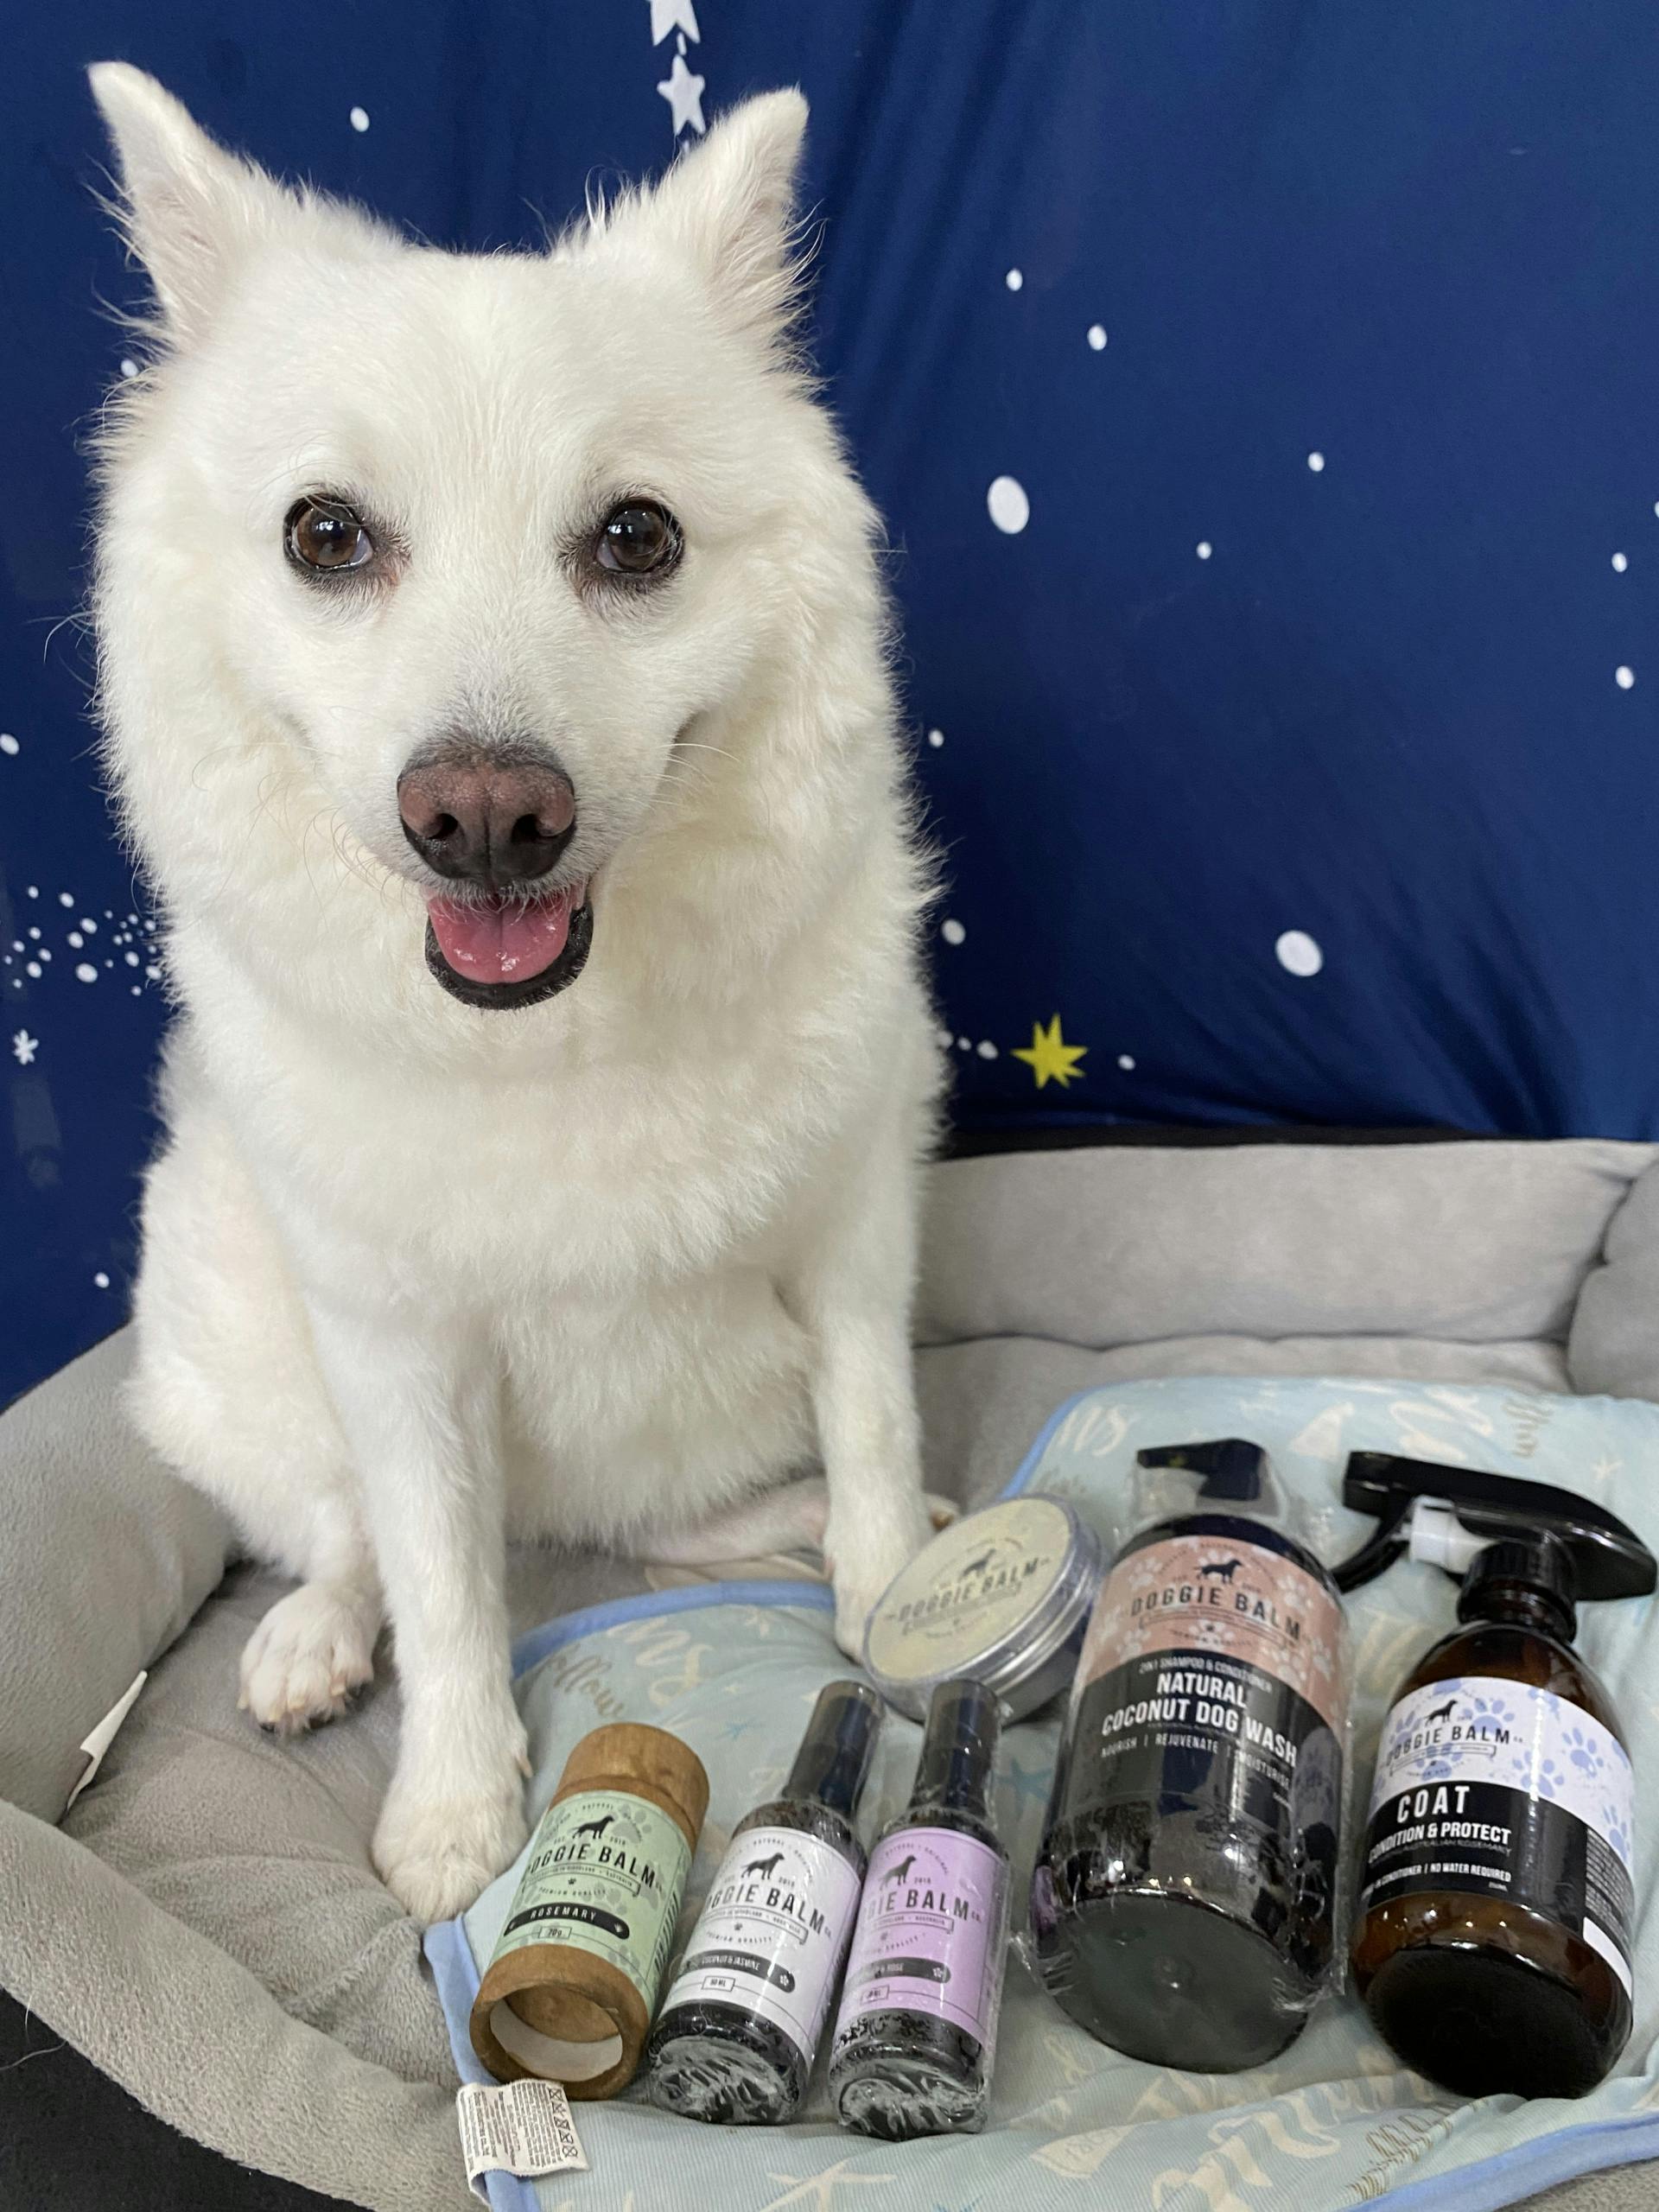 Say Goodbye to Buyer’s Remorse with Pawjourr Sampling!